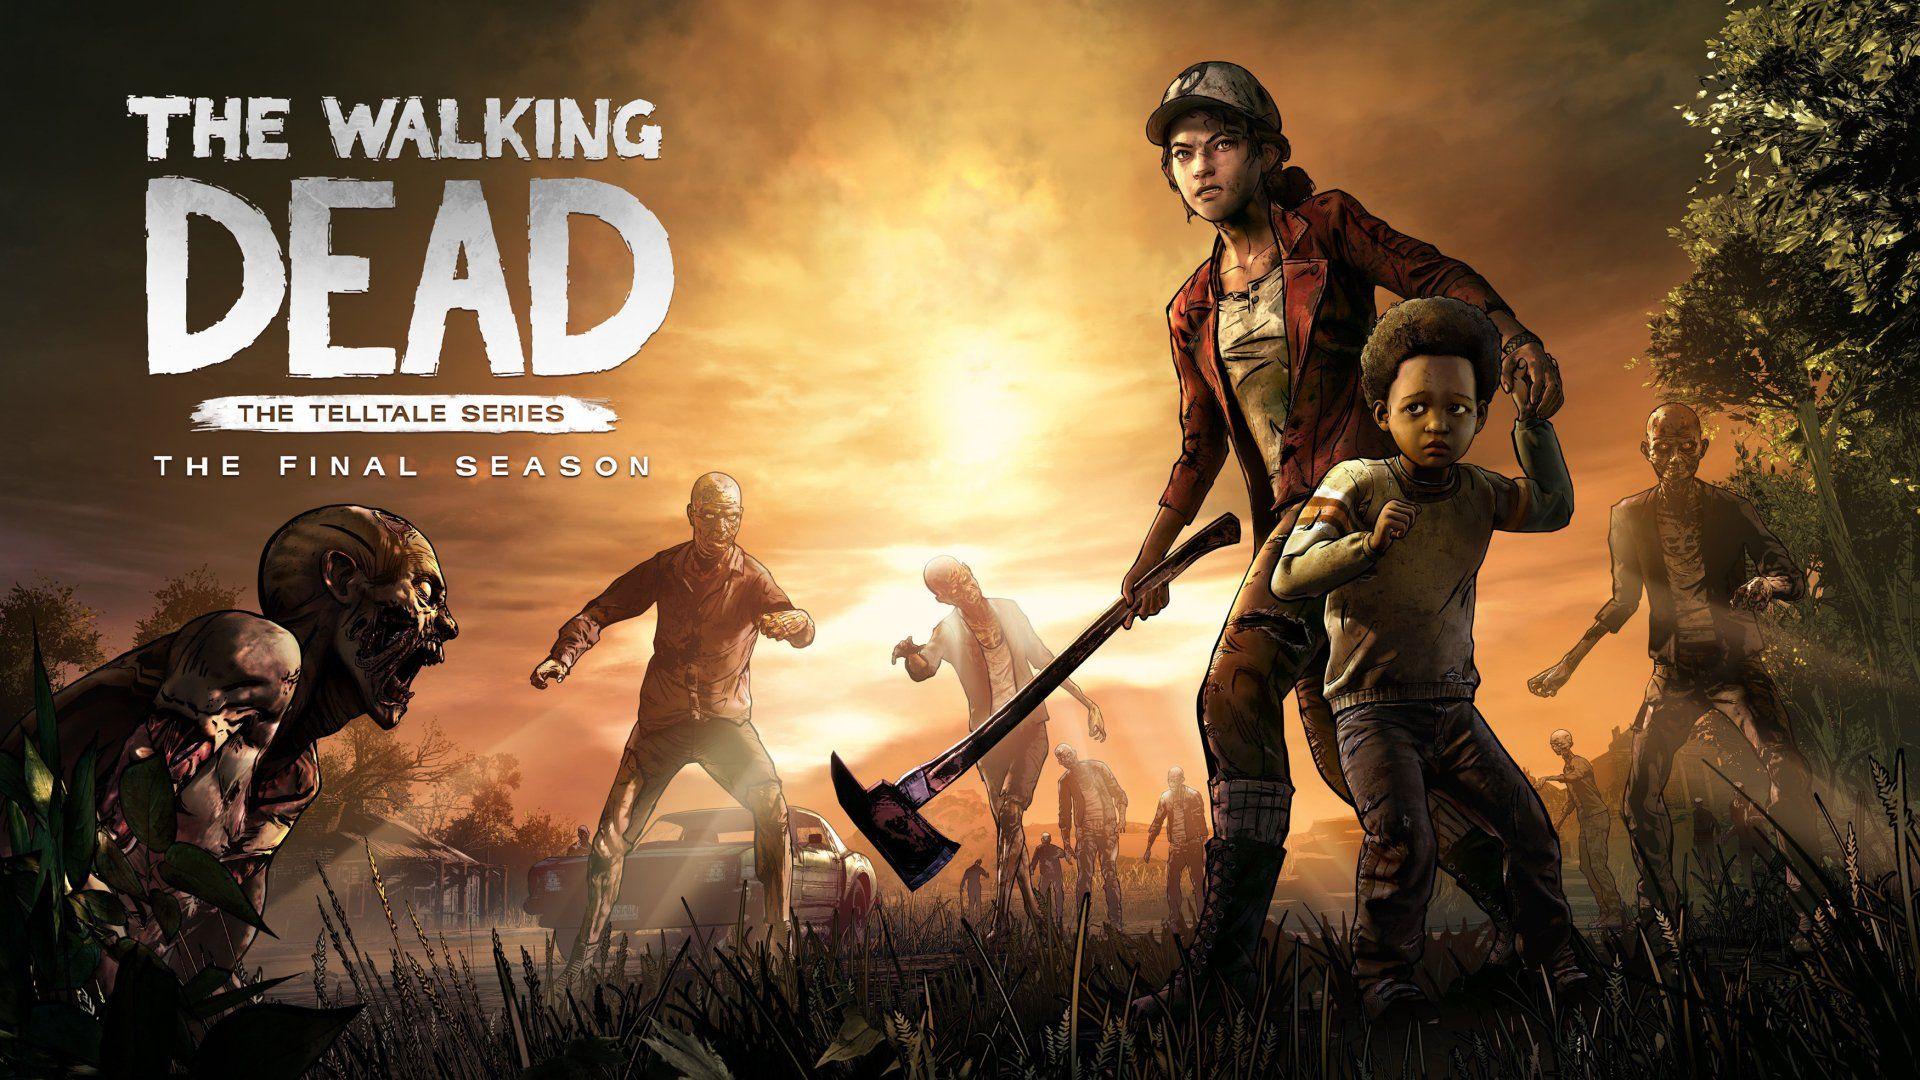 the walking dead game download free pc full